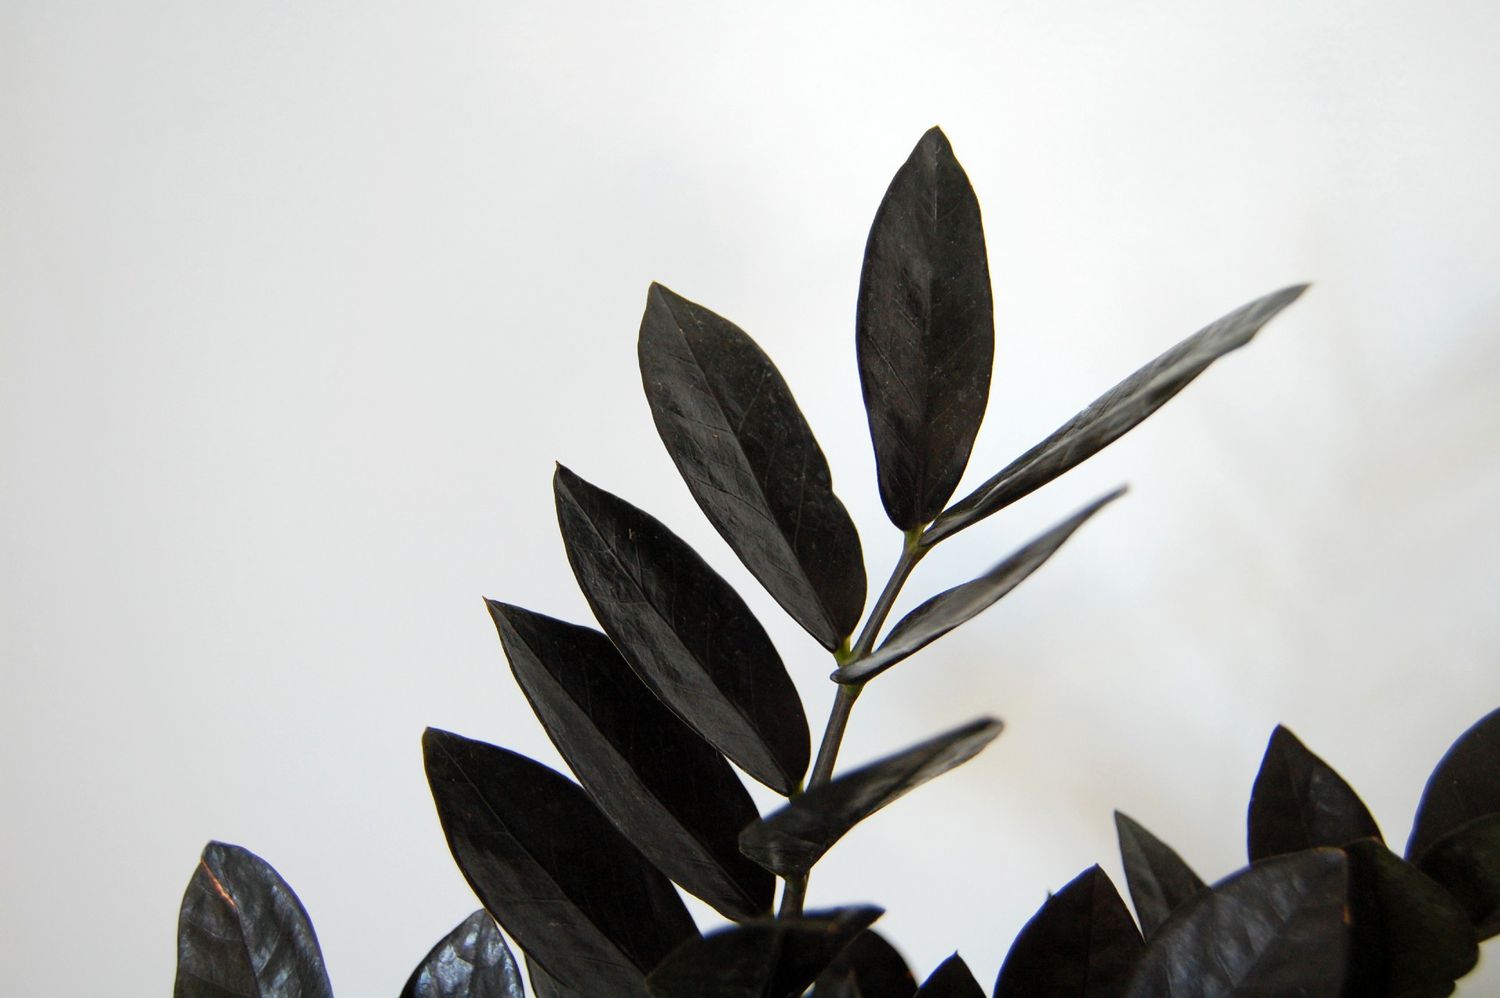 Dark purple raven ZZ plant stems and leaves against a white wall.